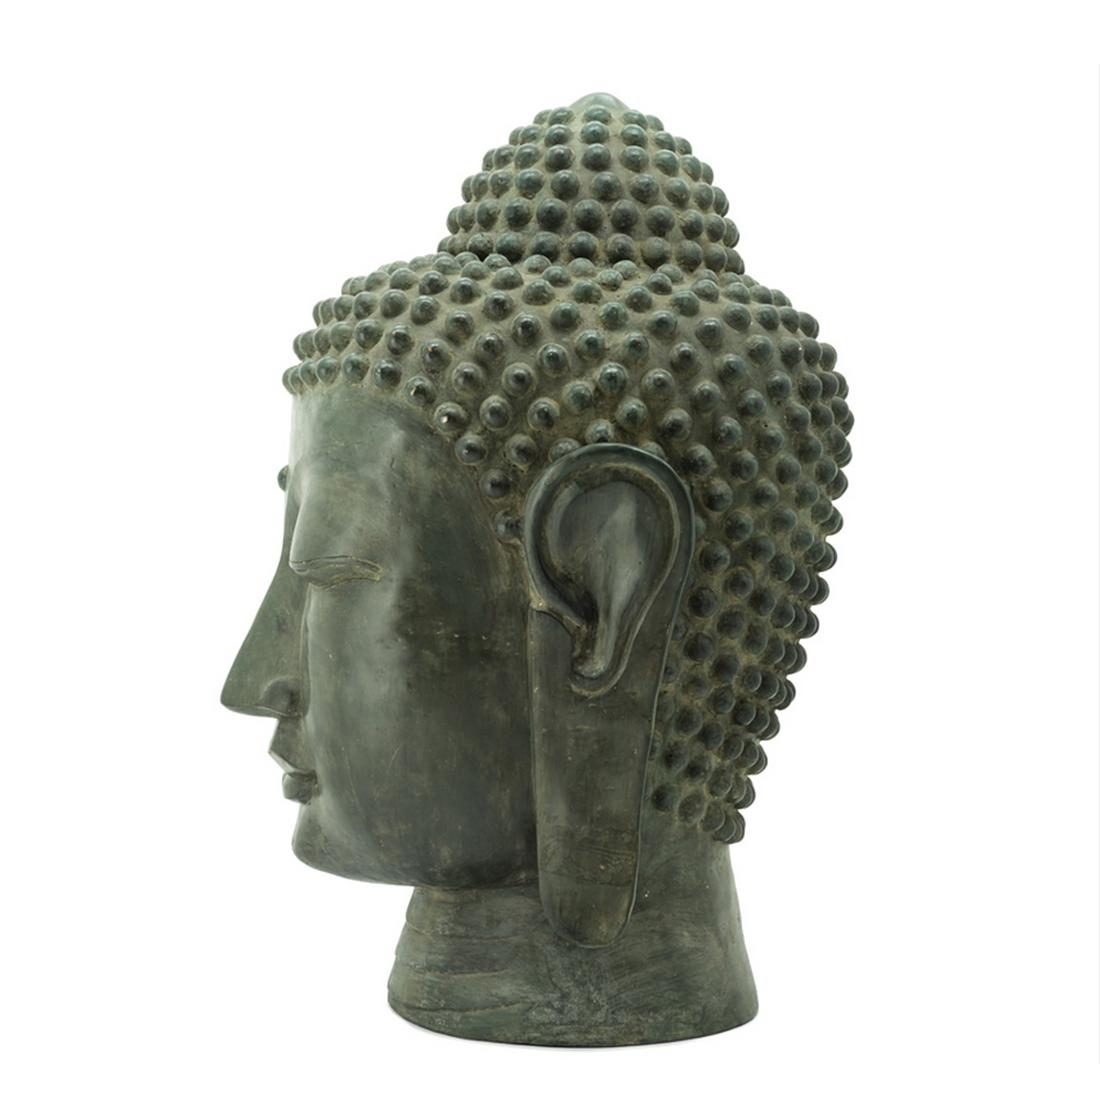 Sculpture Buddha medium all in solid
brass in oxydized finish.